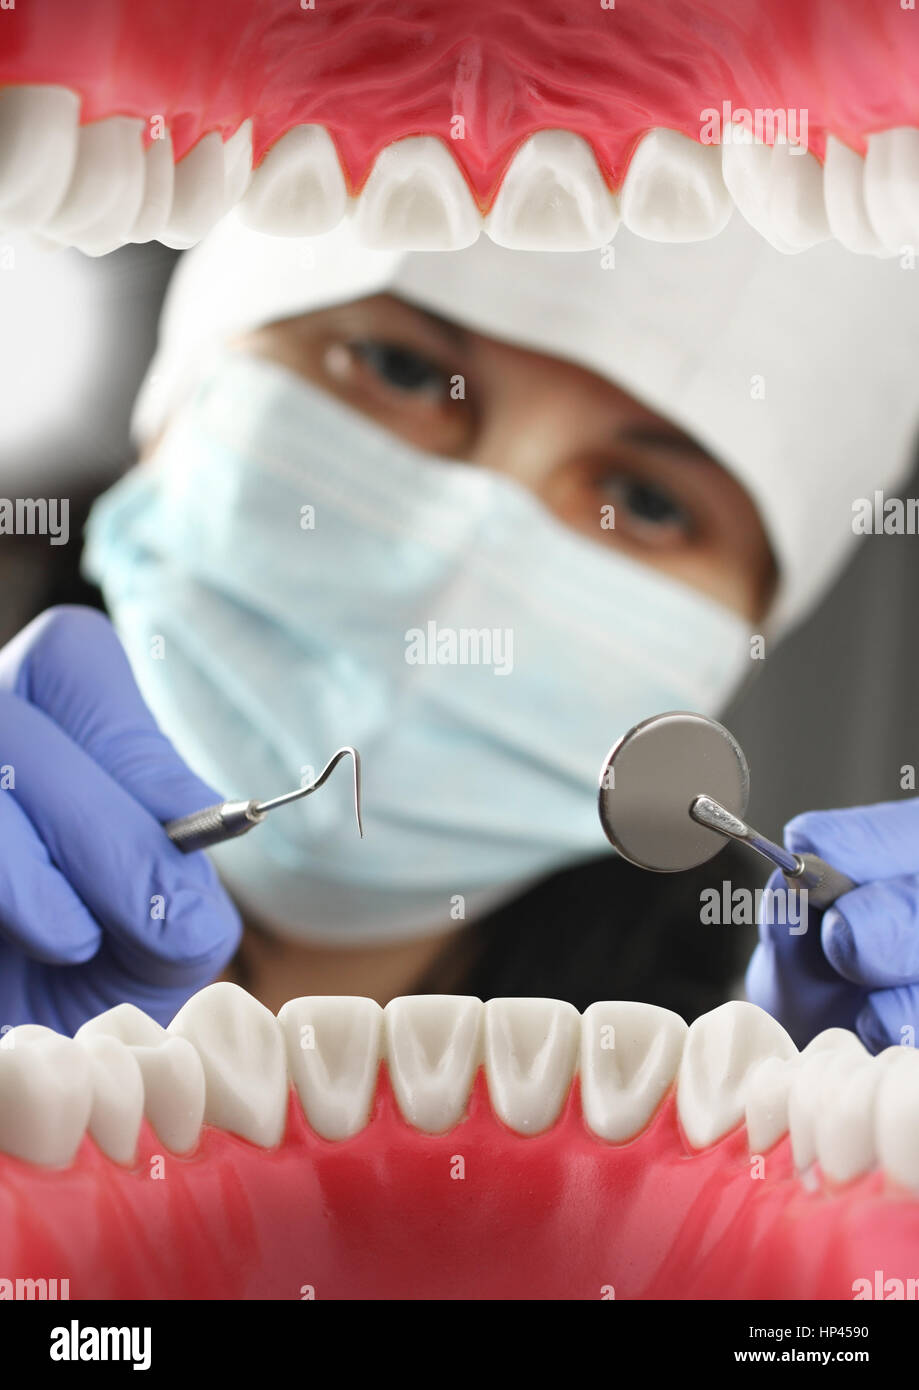 doctor treats teeth, Inside mouth view. Soft focus Stock Photo